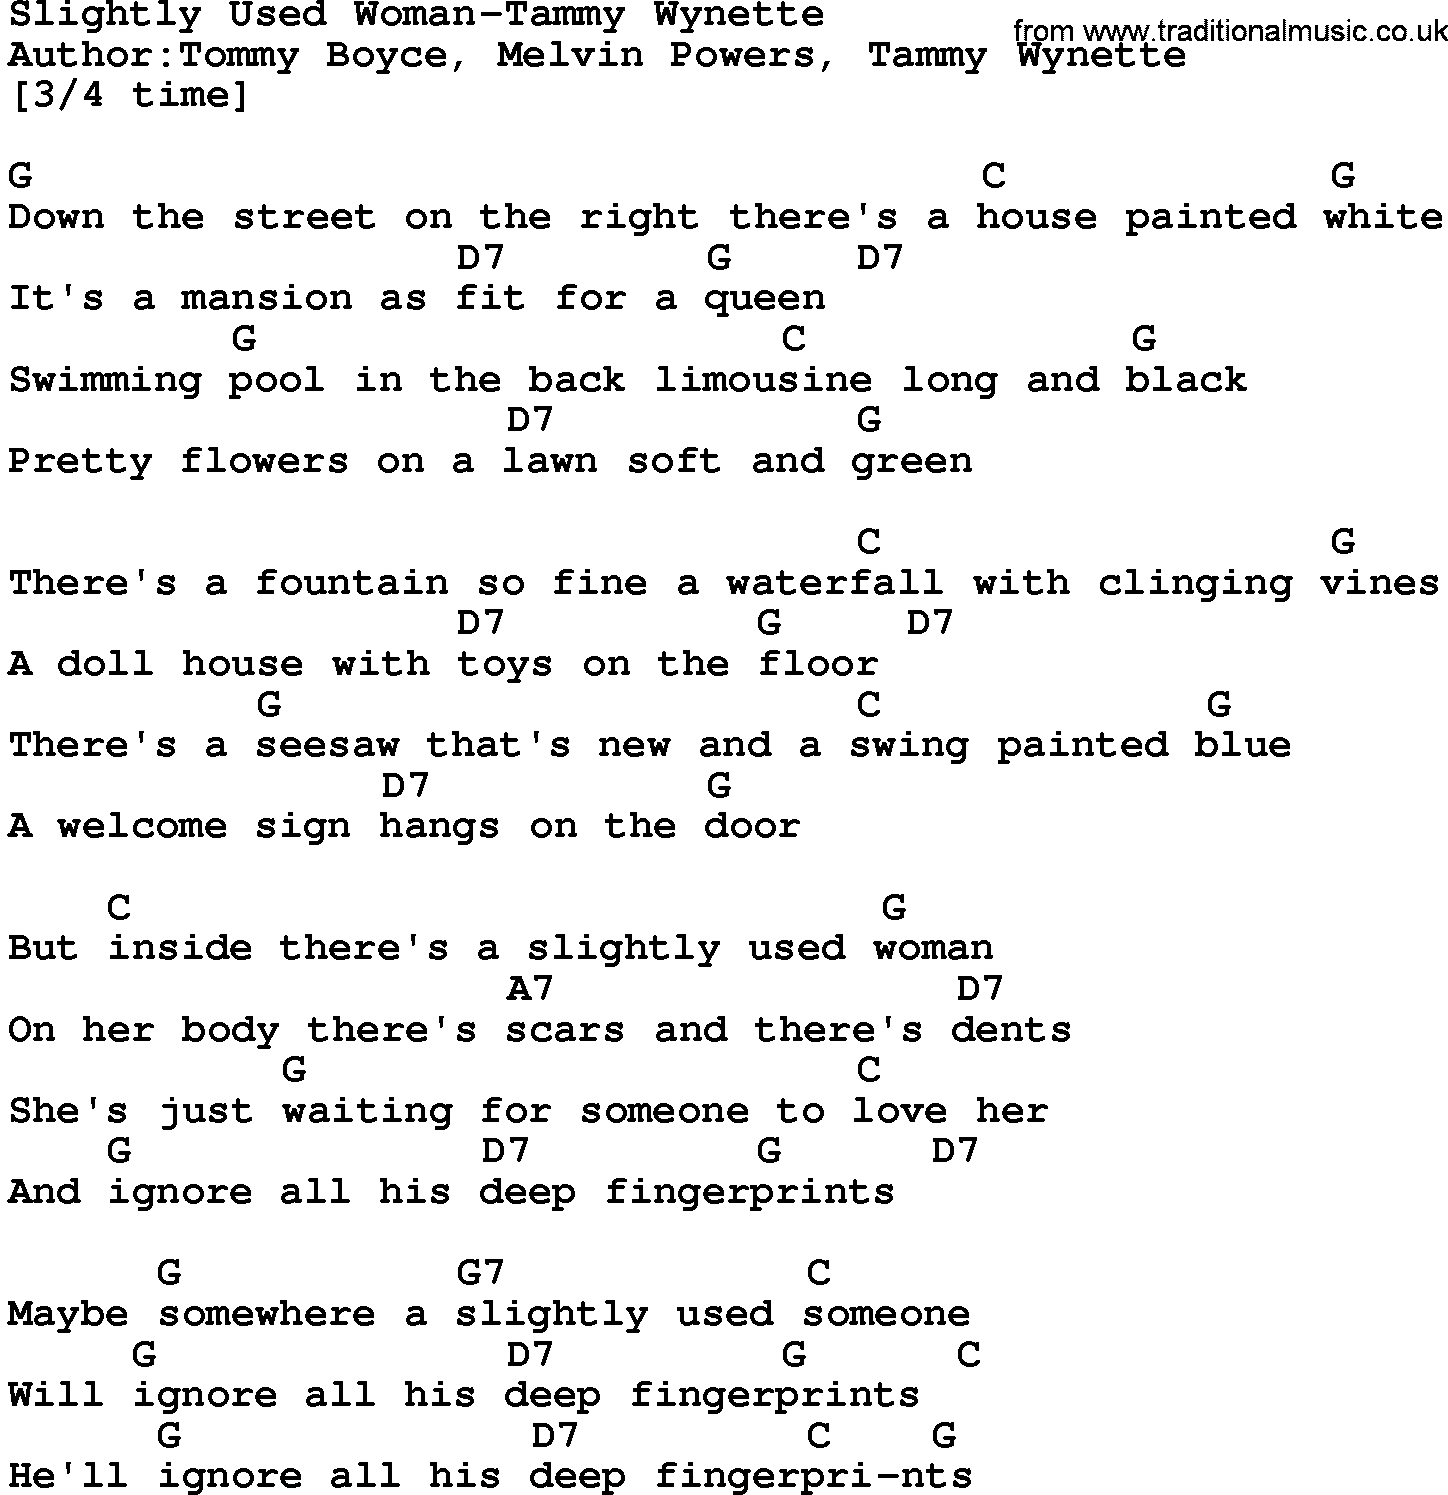 Country music song: Slightly Used Woman-Tammy Wynette lyrics and chords